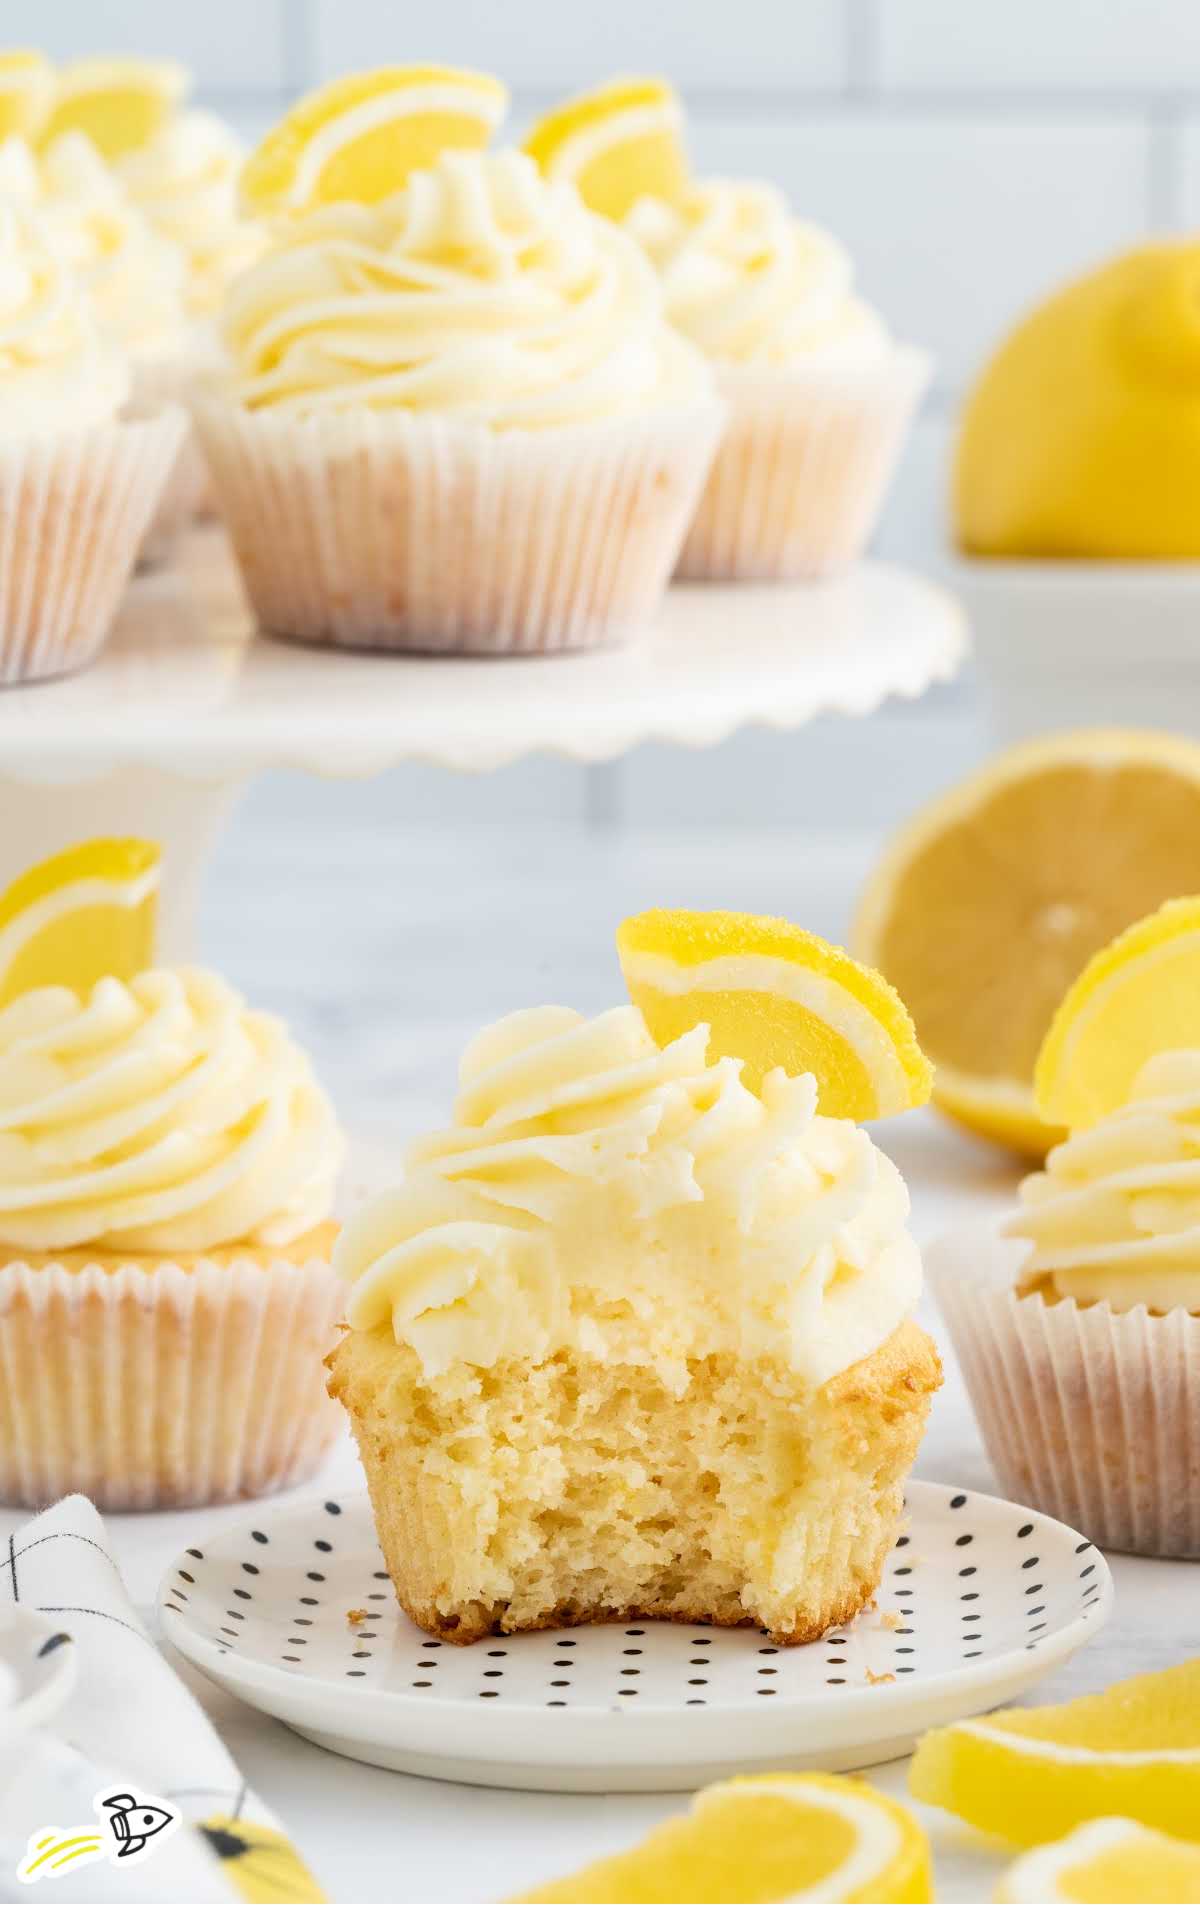 a close up shot of a Lemon Cupcake on a plate topped with a slice of lemon and frosting with a bite taken out of it